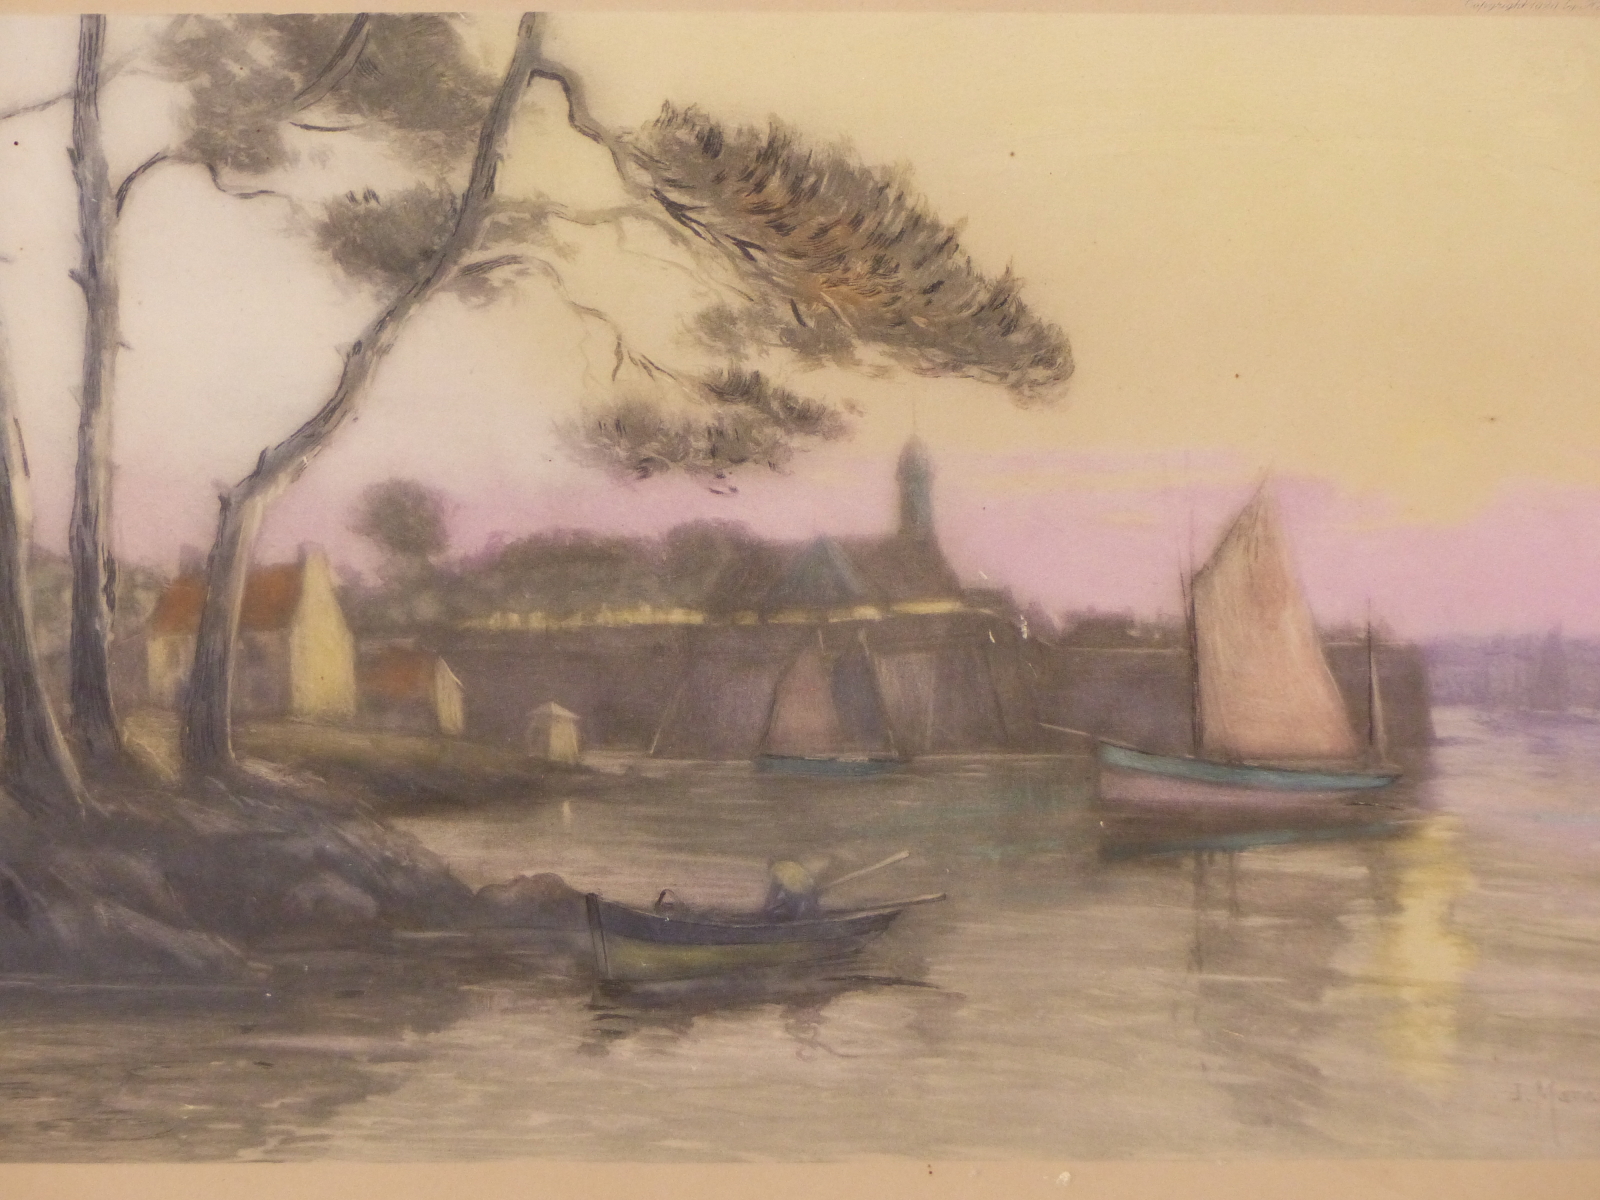 A COLOUR LITHOGRAPH OF CONCARNEAU AFTER J. MARCELIN, TOGETHER WITH A BATIQUE OF A HOUSE SIGNED S.